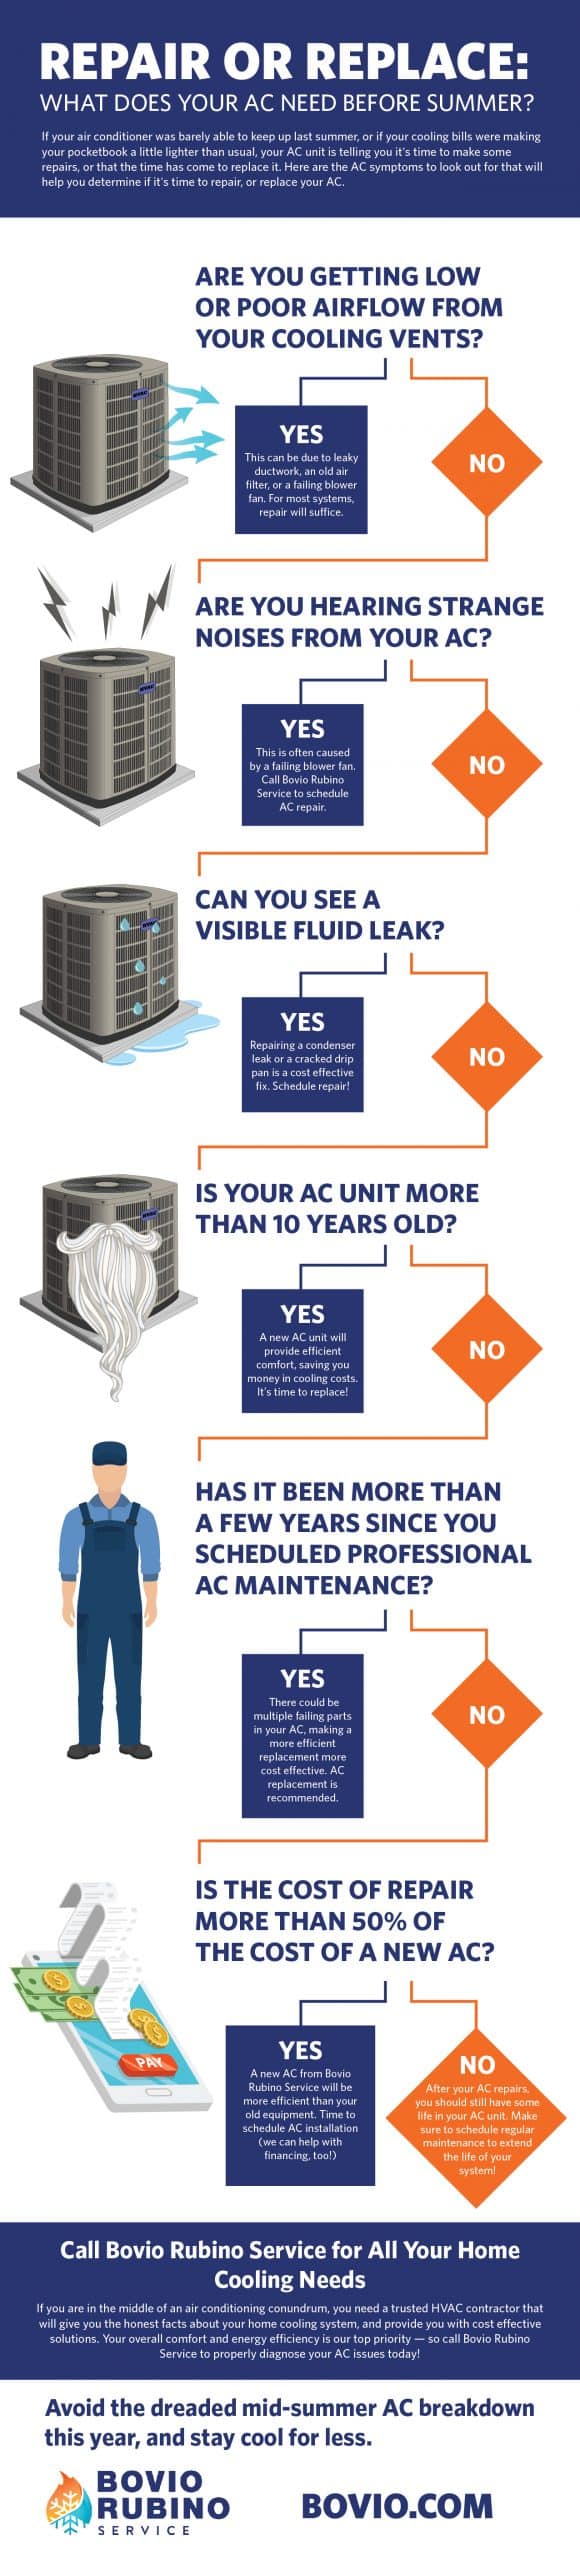 Repair replace AC flow chart graphic